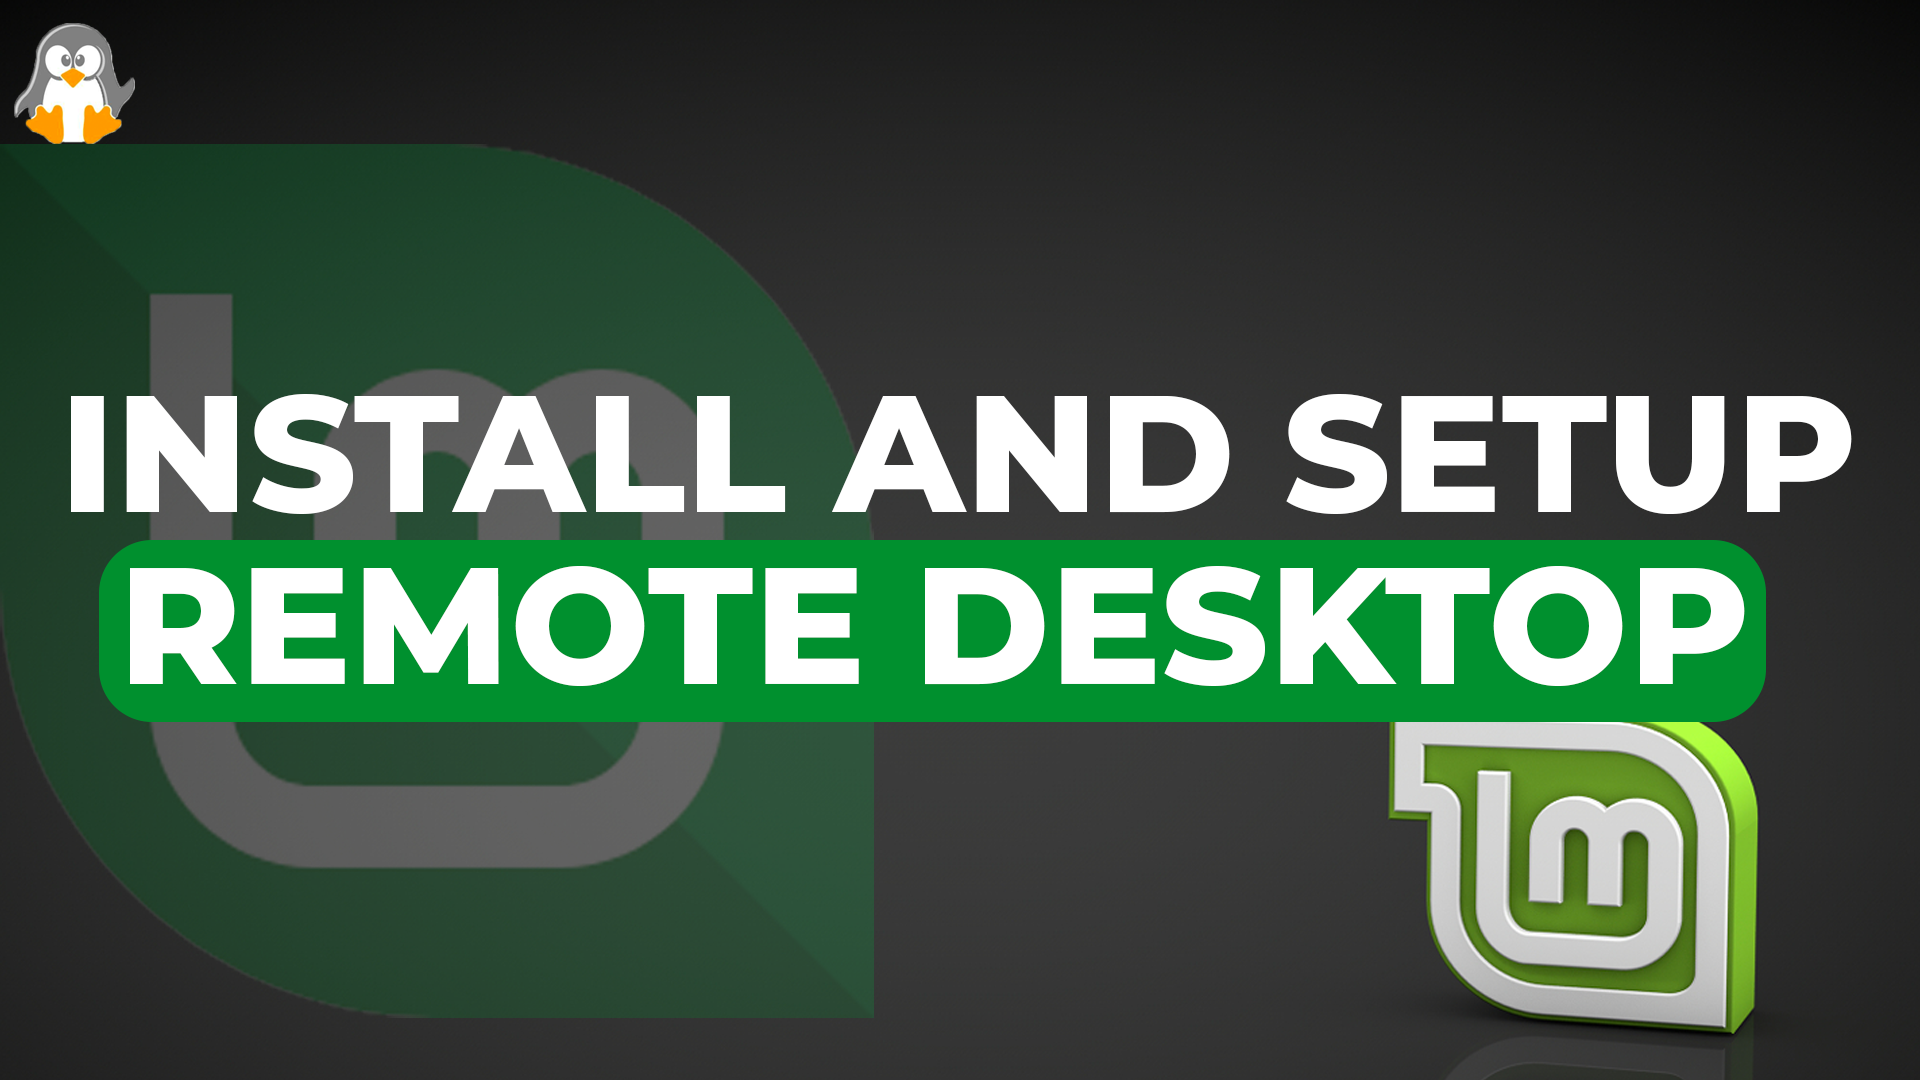 How to Install and Setup Remote Desktop on Linux Mint?